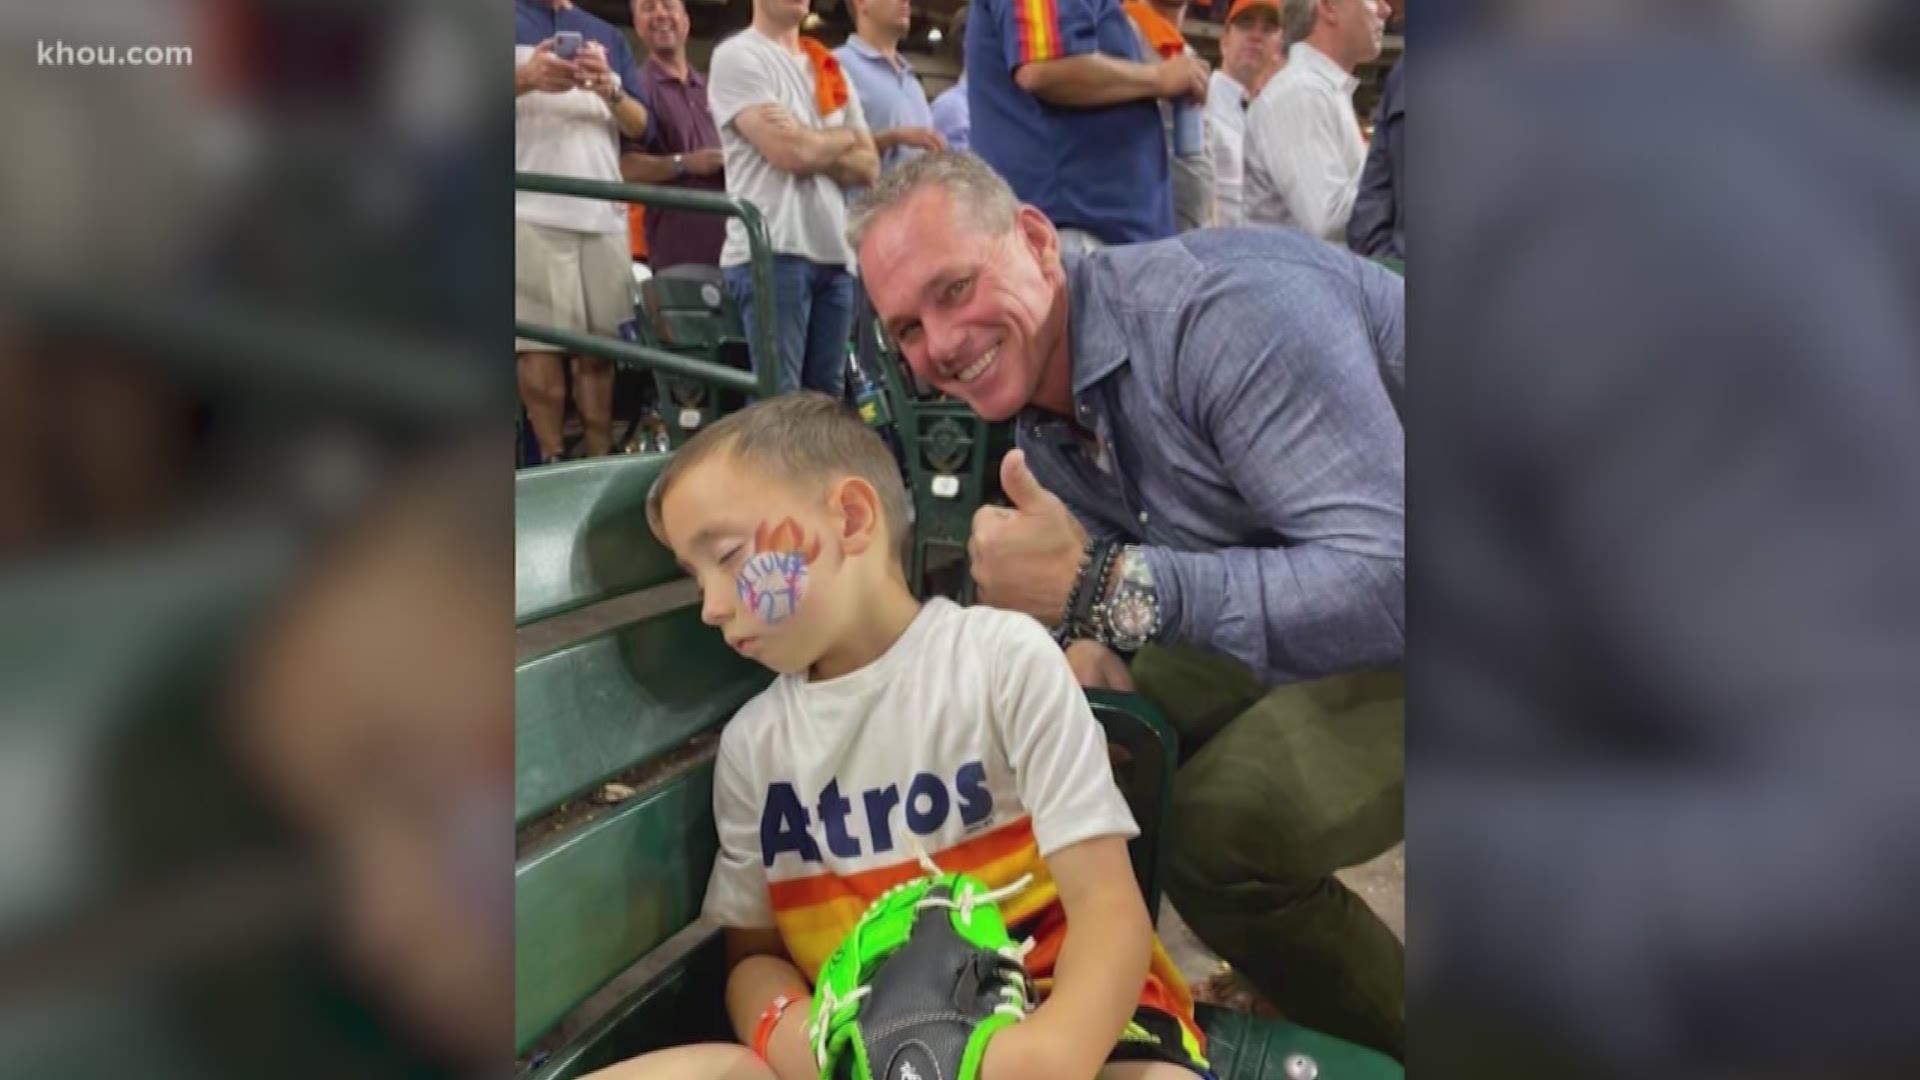 Levi Hunt, 6, fell asleep during the Astros playoff game Sunday and Hall of Famer Craig Biggio couldn't resist taking a pic with him.